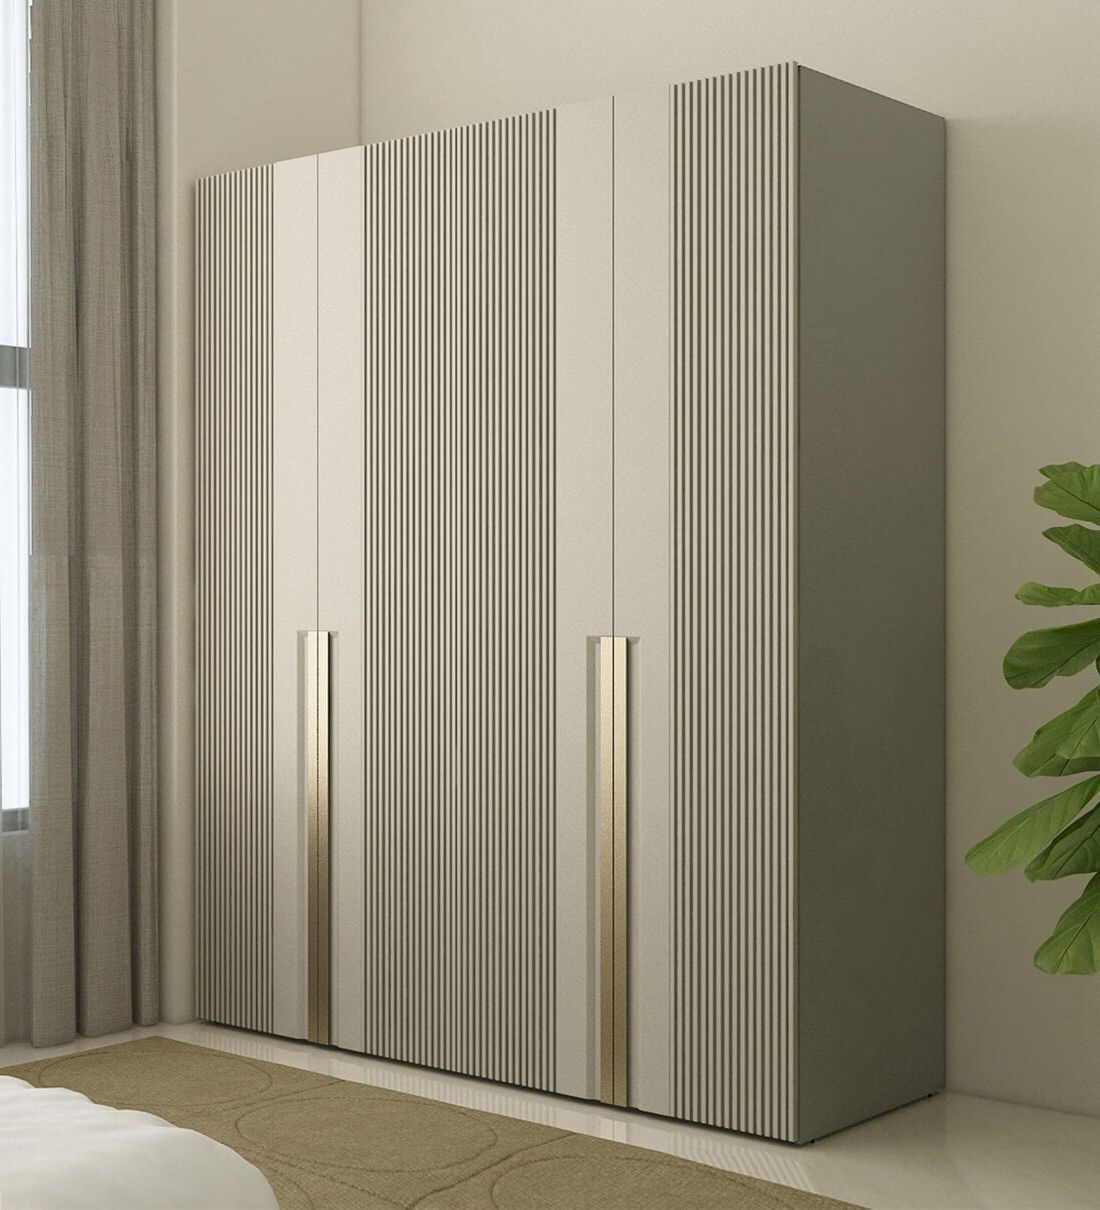 Buy Astor Modern 4 Door Wardrobe In Cashmere Colour With Stripes At 26% Off Spacewood | Pepperfry Pertaining To Cheap 4 Door Wardrobes (Gallery 8 of 20)